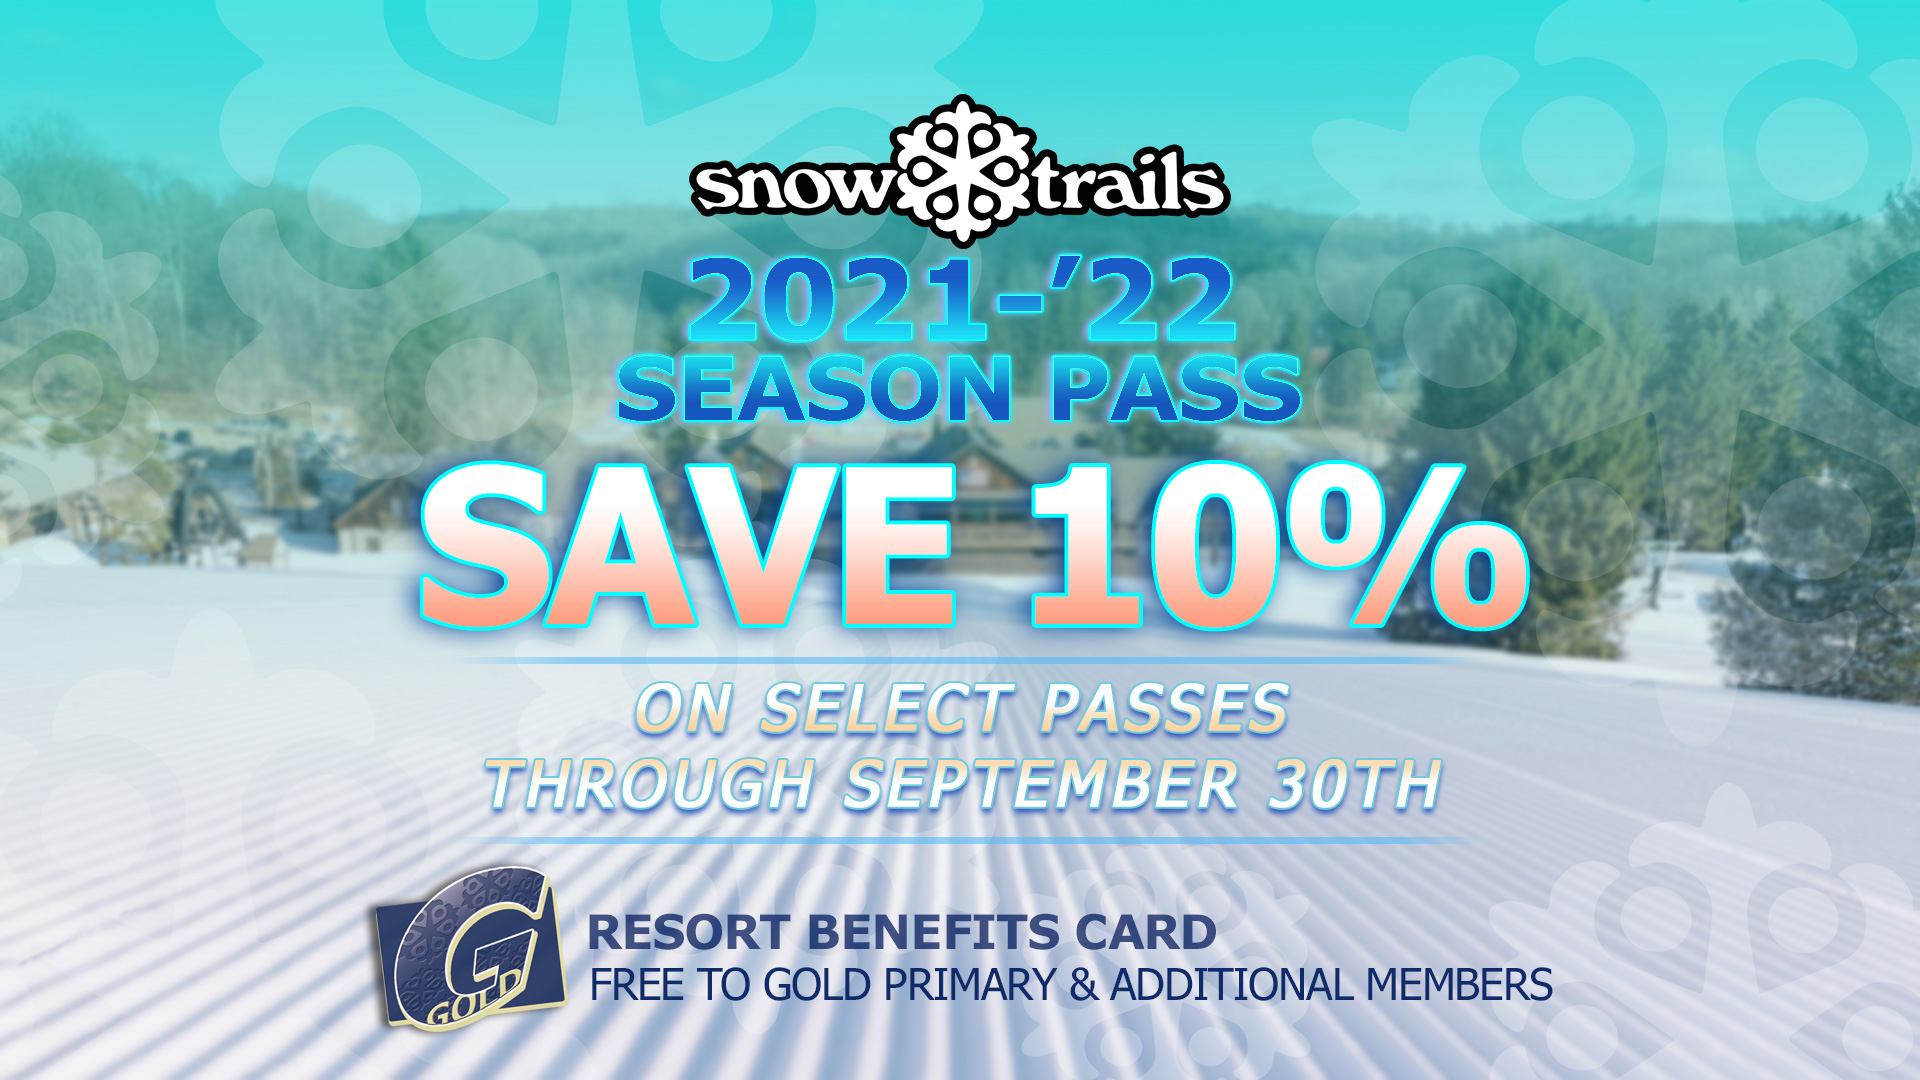 Save 10% on select Snow Trails Season Passes through September 30th